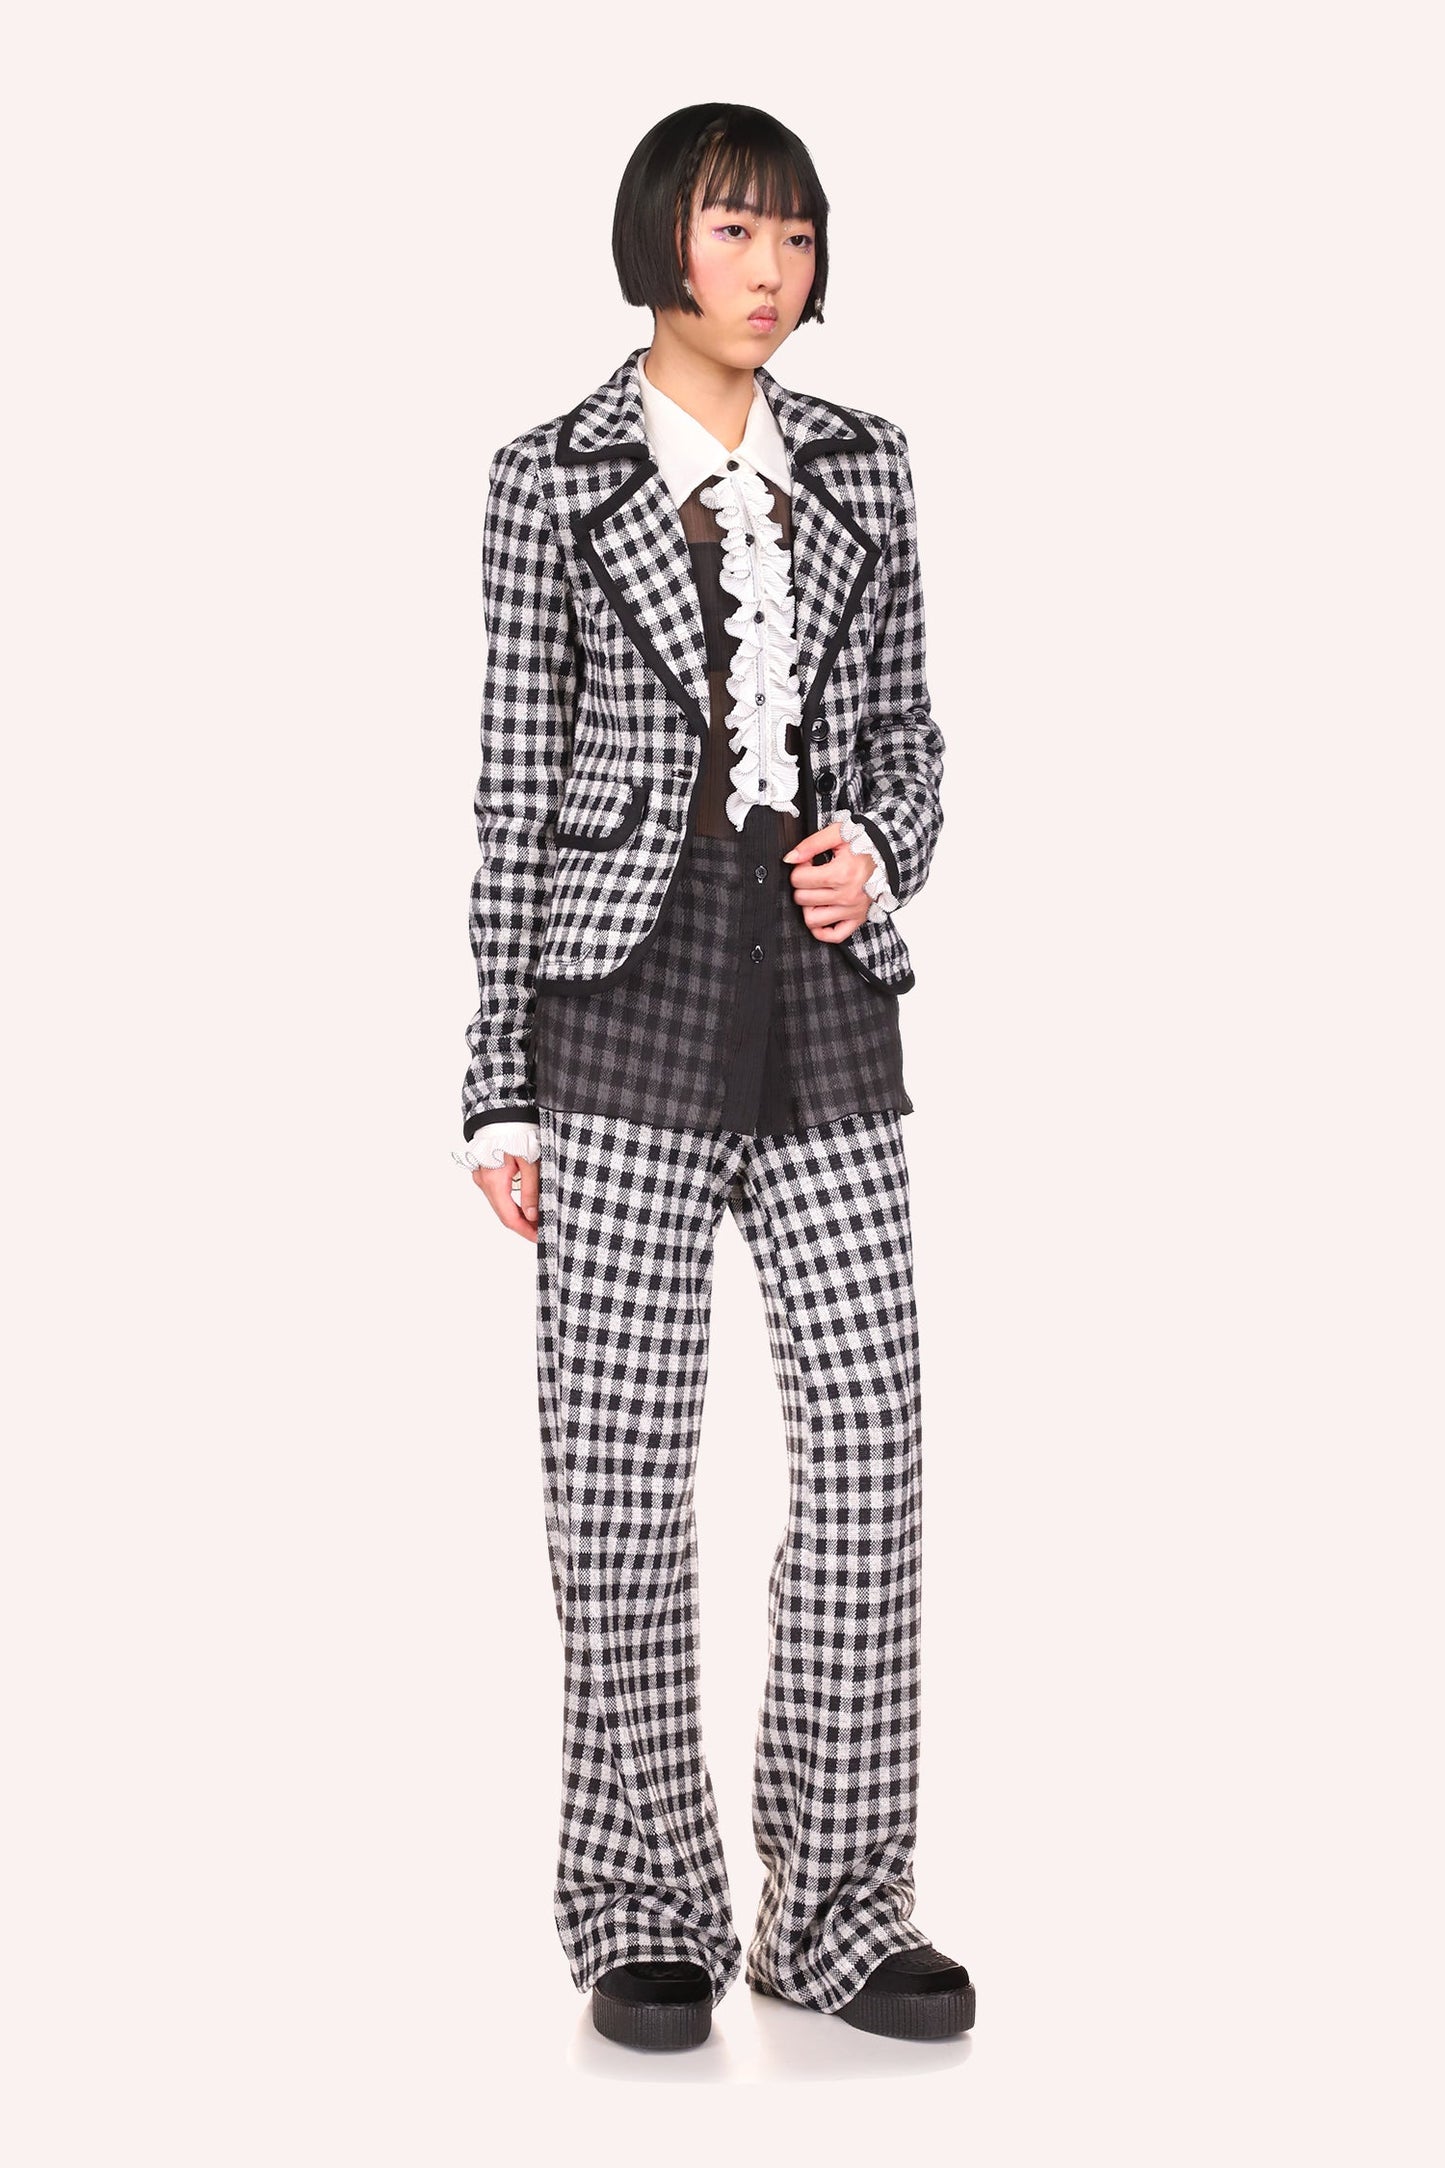 You will absolutely love how these black checkered pants paired with the black checkered jacket